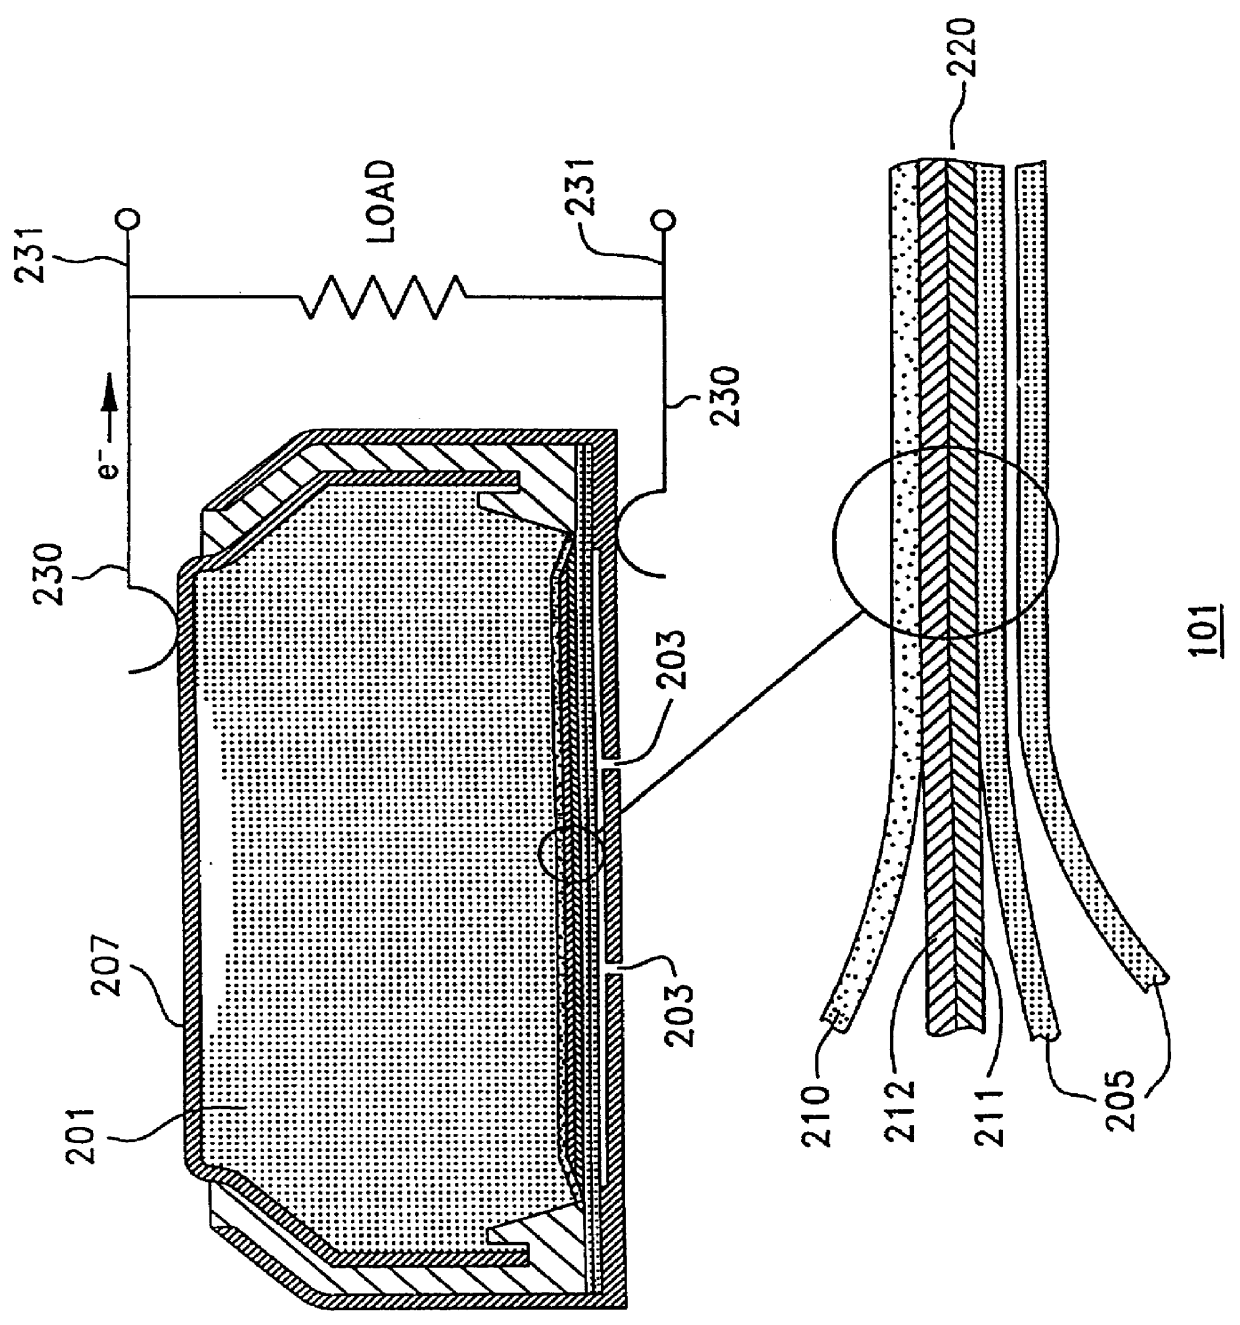 Apparatus for sensing oxygen concentration